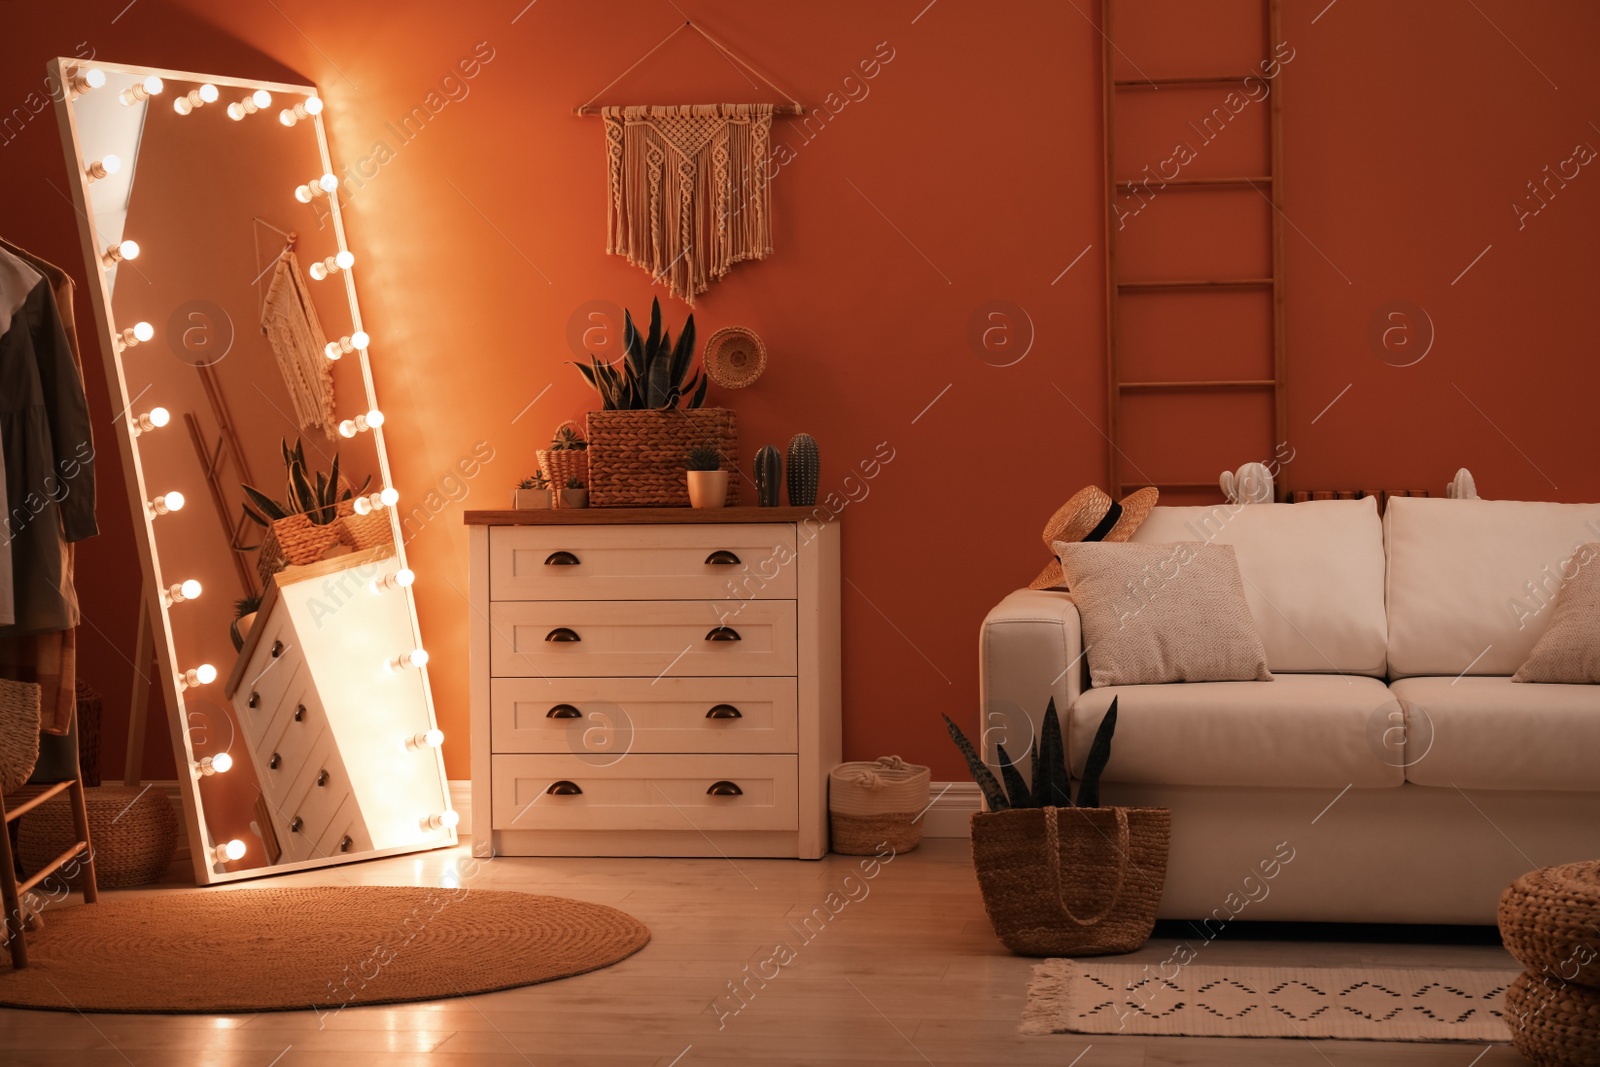 Photo of Large mirror with light bulbs and chest of drawers in stylish room interior